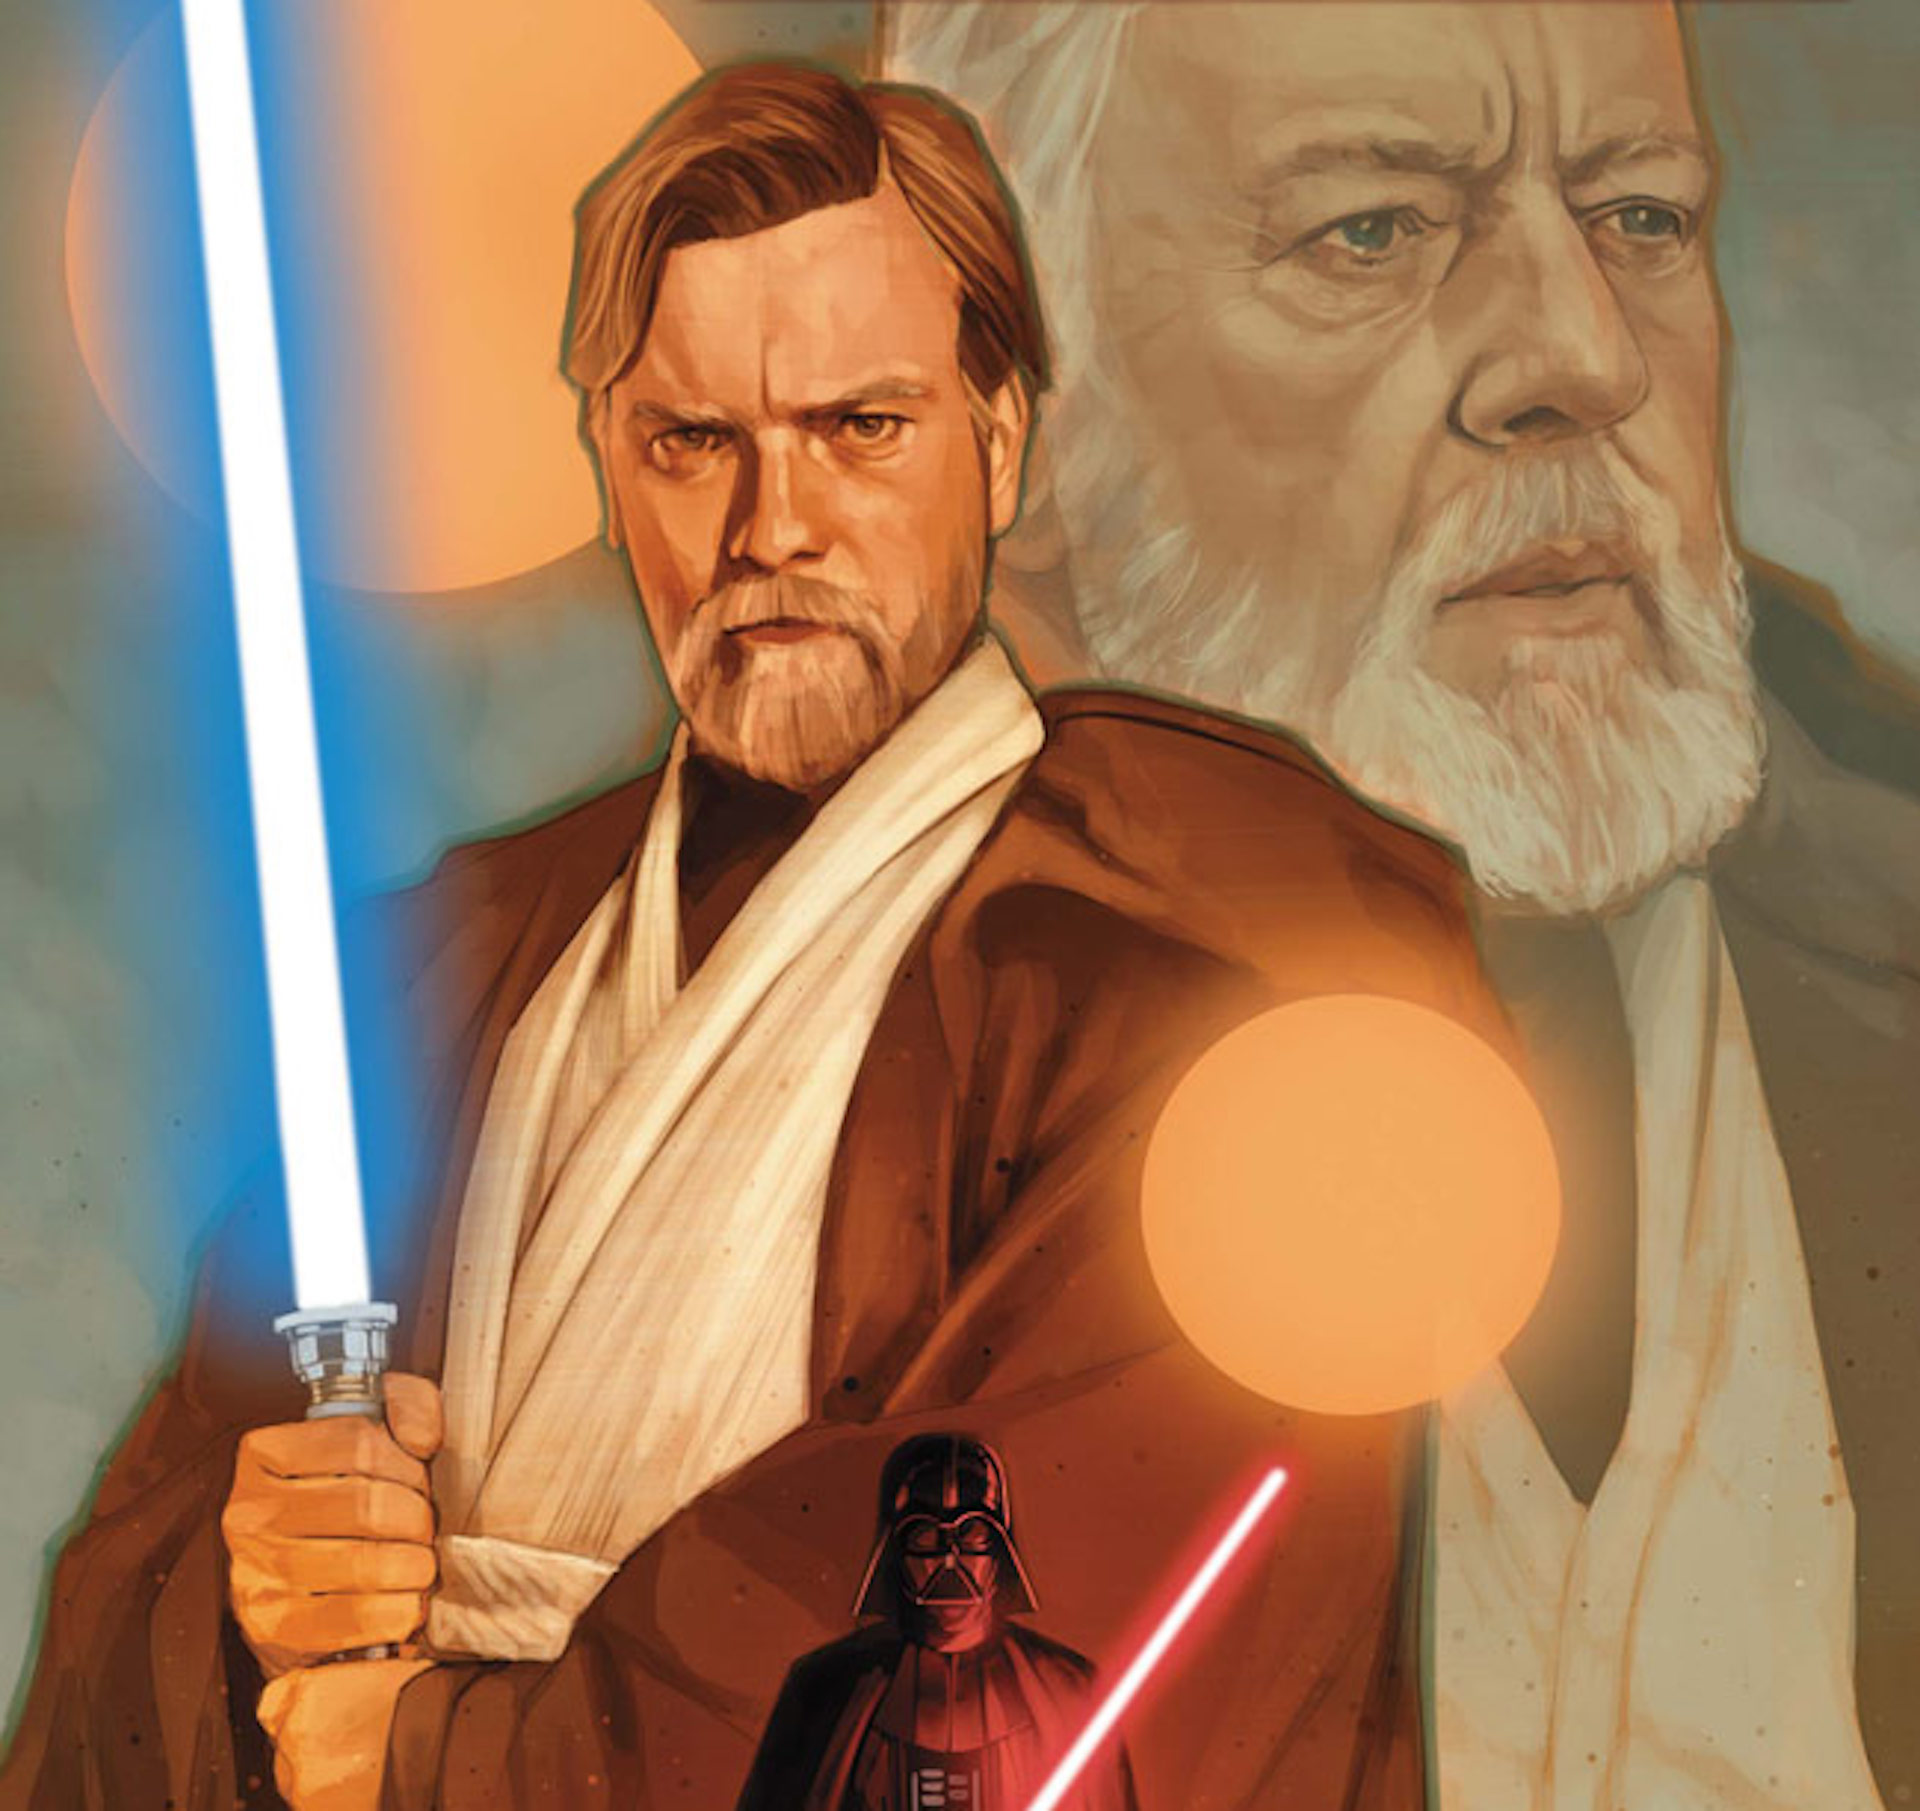 'Star Wars: Obi-Wan' #1 is an exciting exploration of Obi-Wan's past